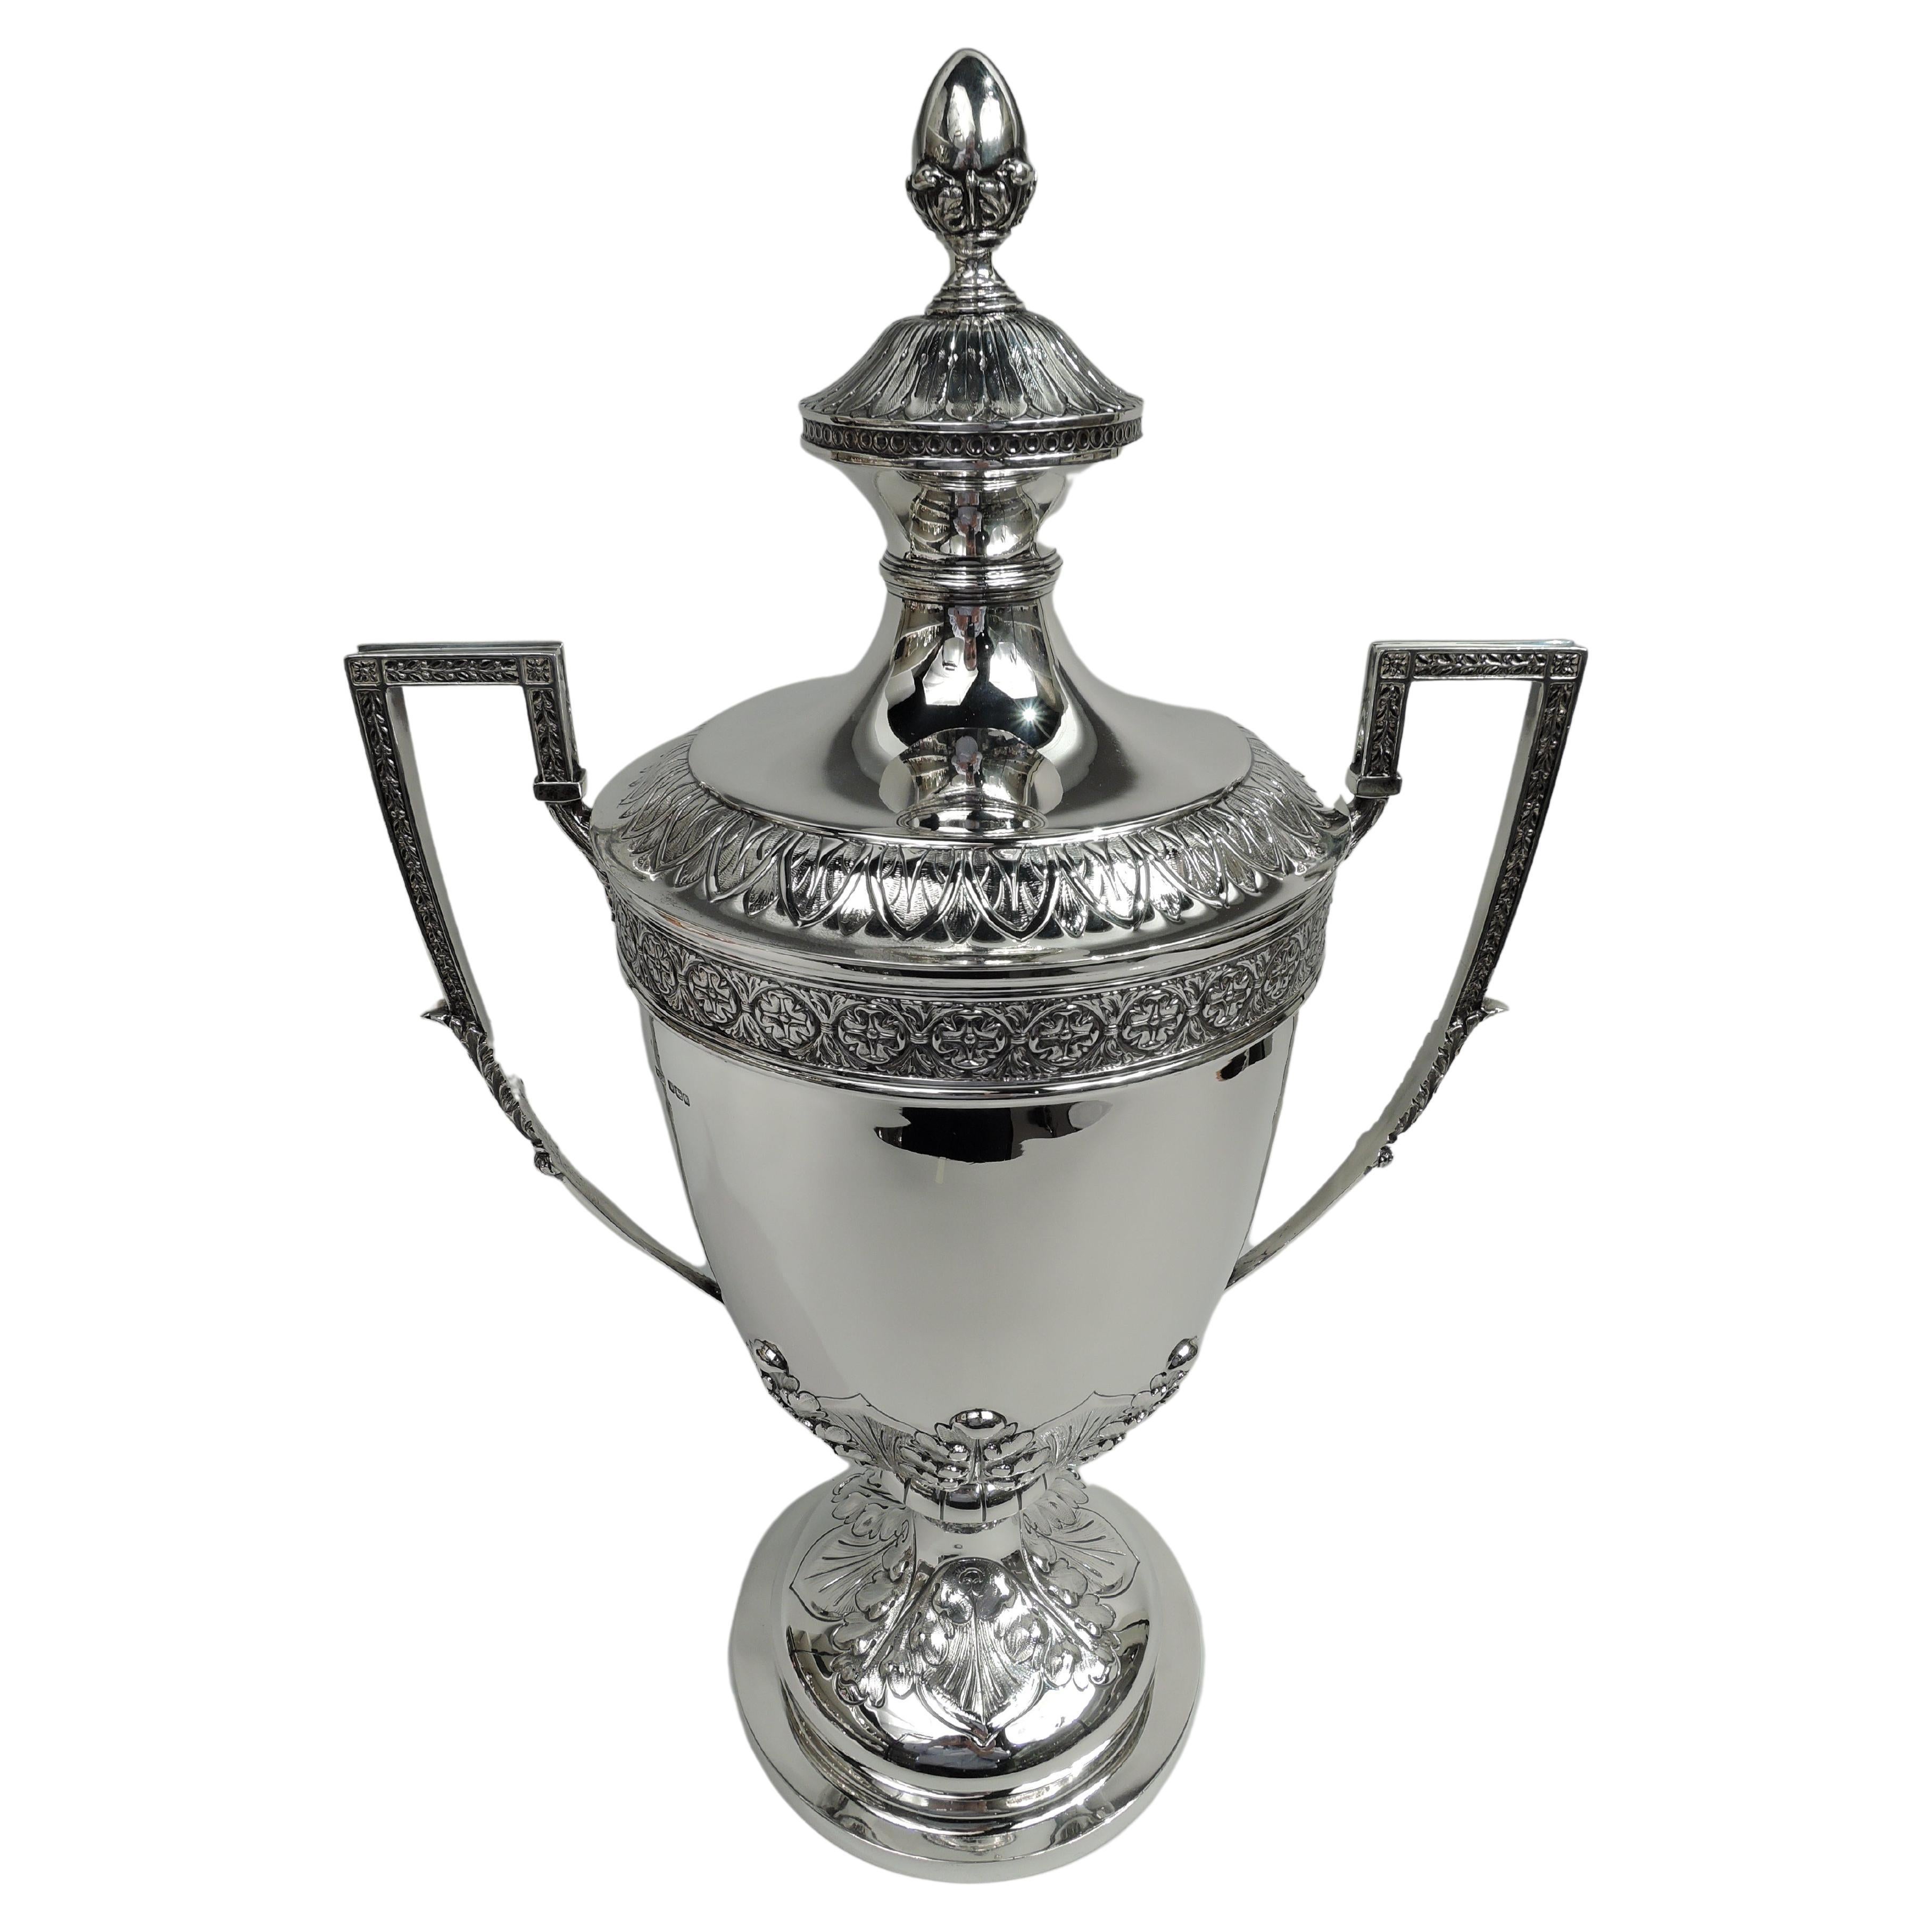 Very Large Market-Fresh English Sterling Silver Covered Urn For Sale